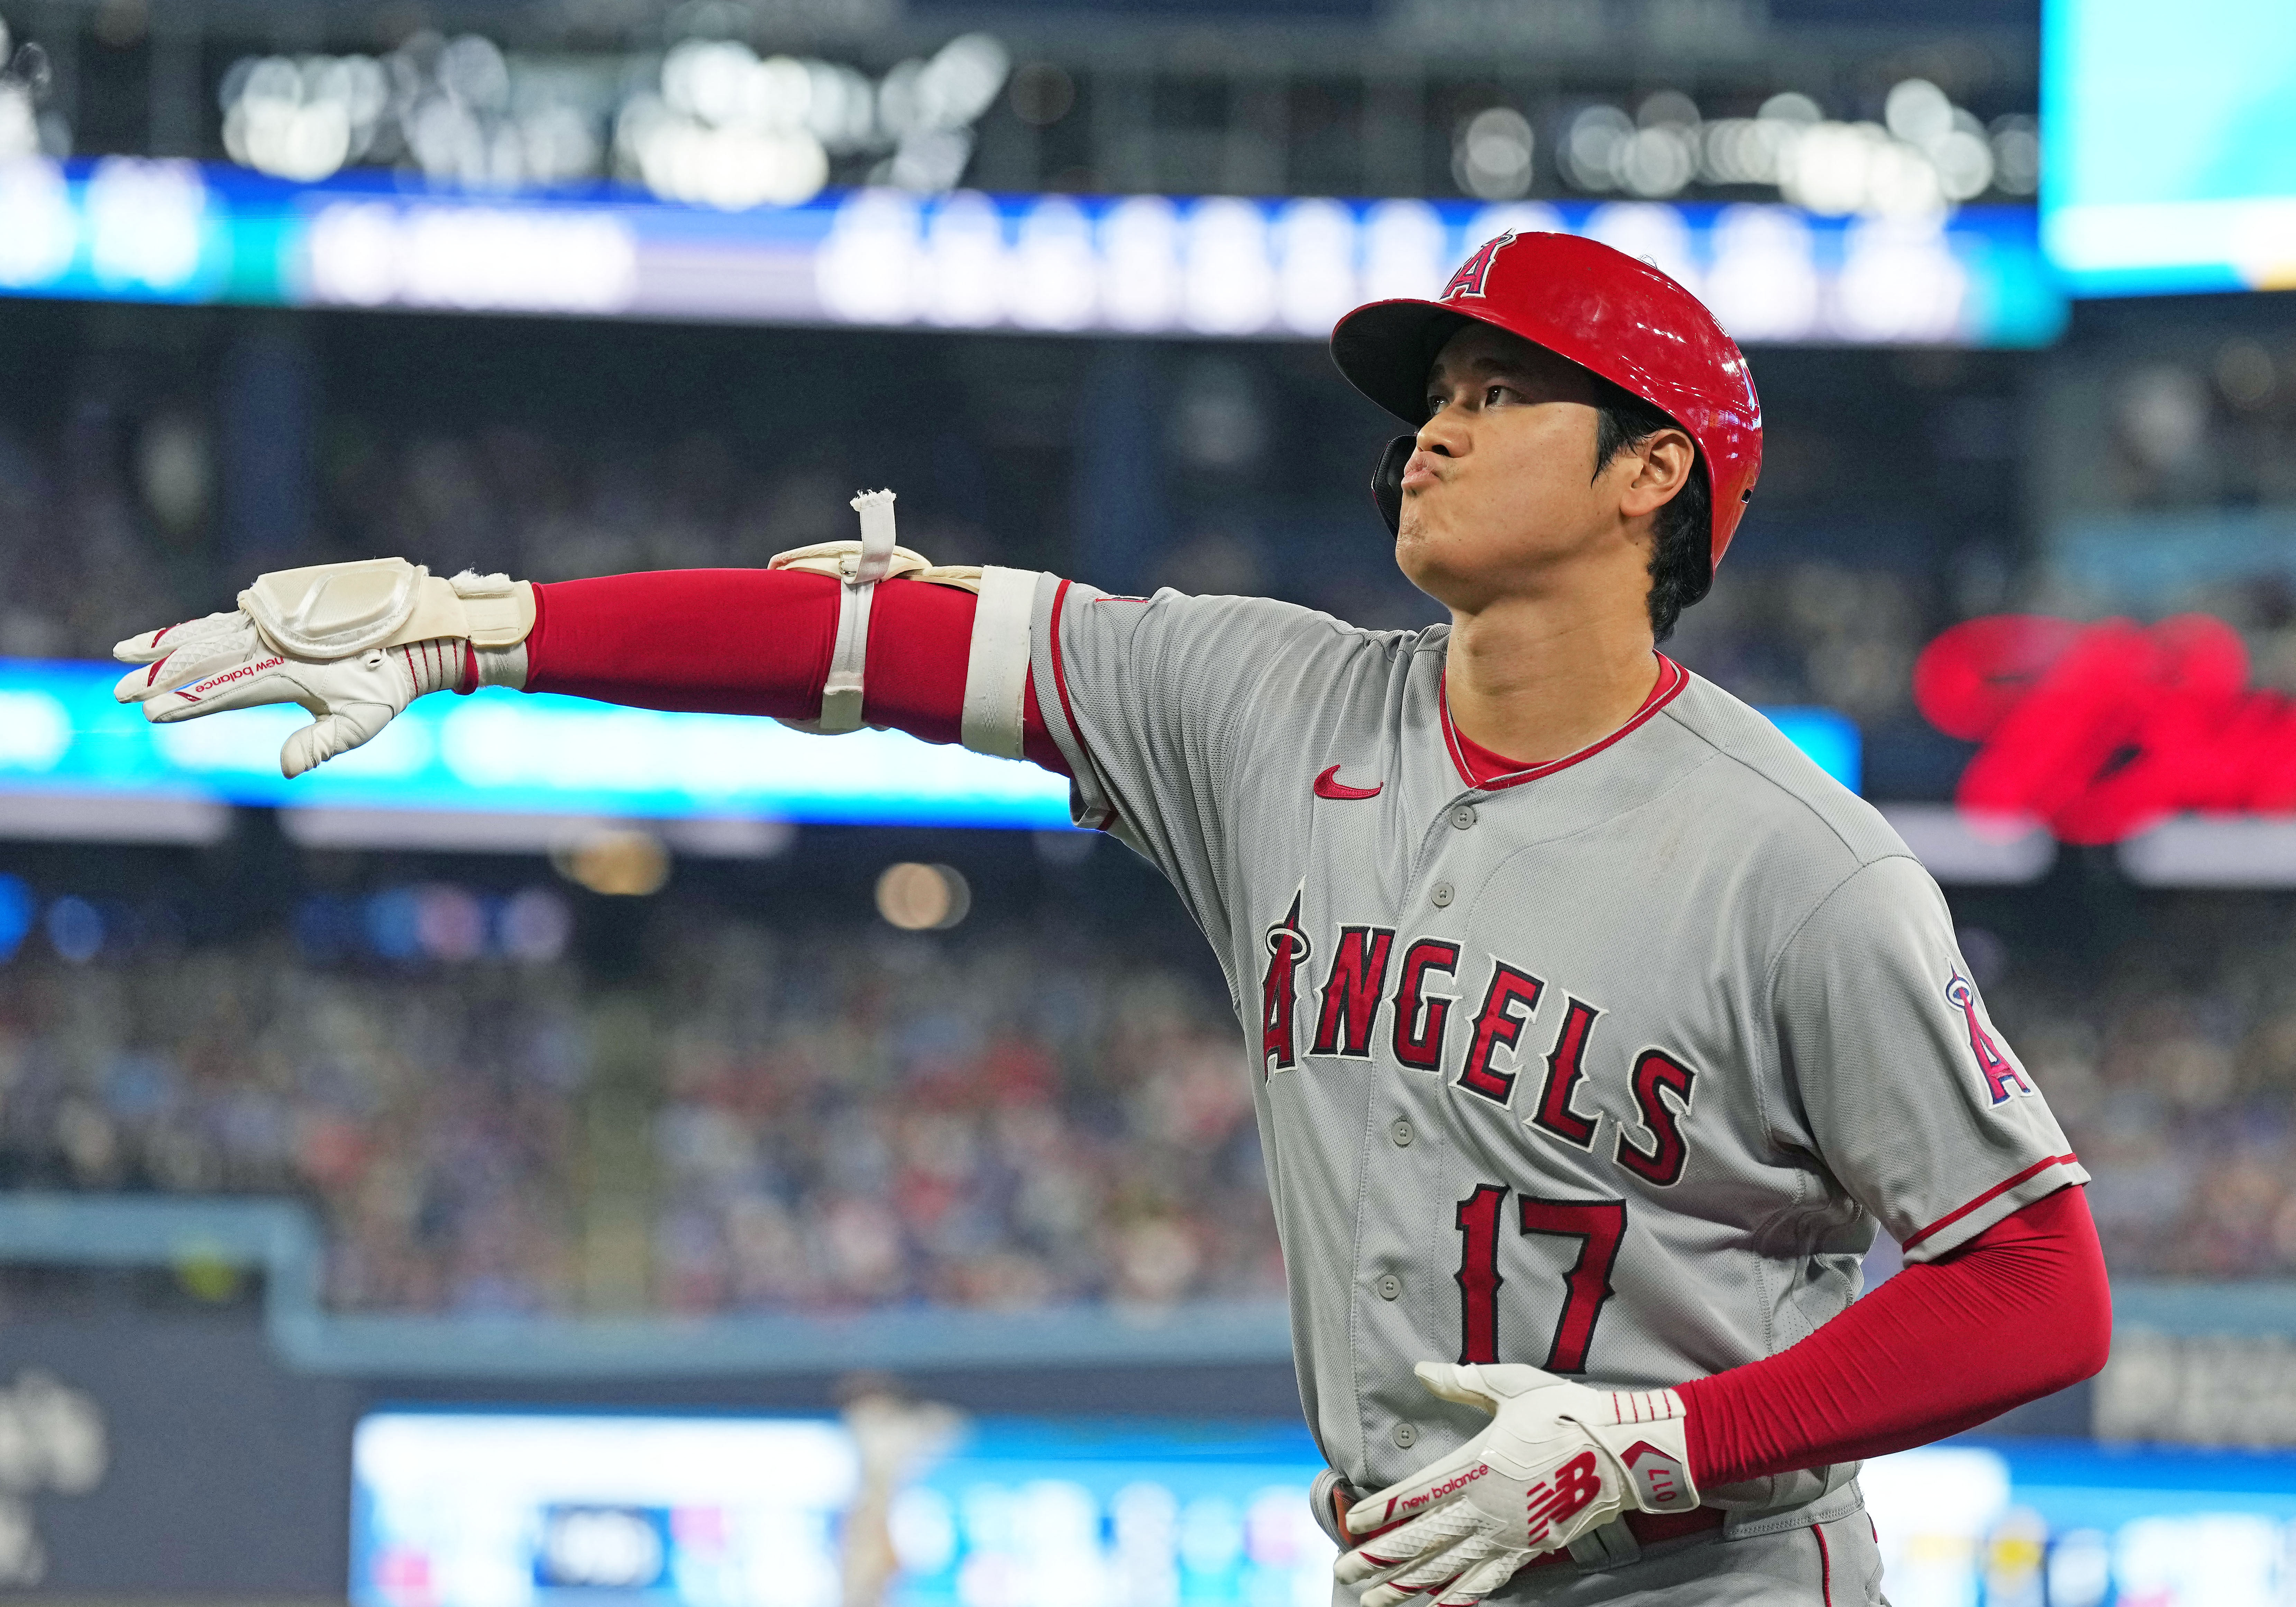 Los Angeles Angels Top 28 Prospects